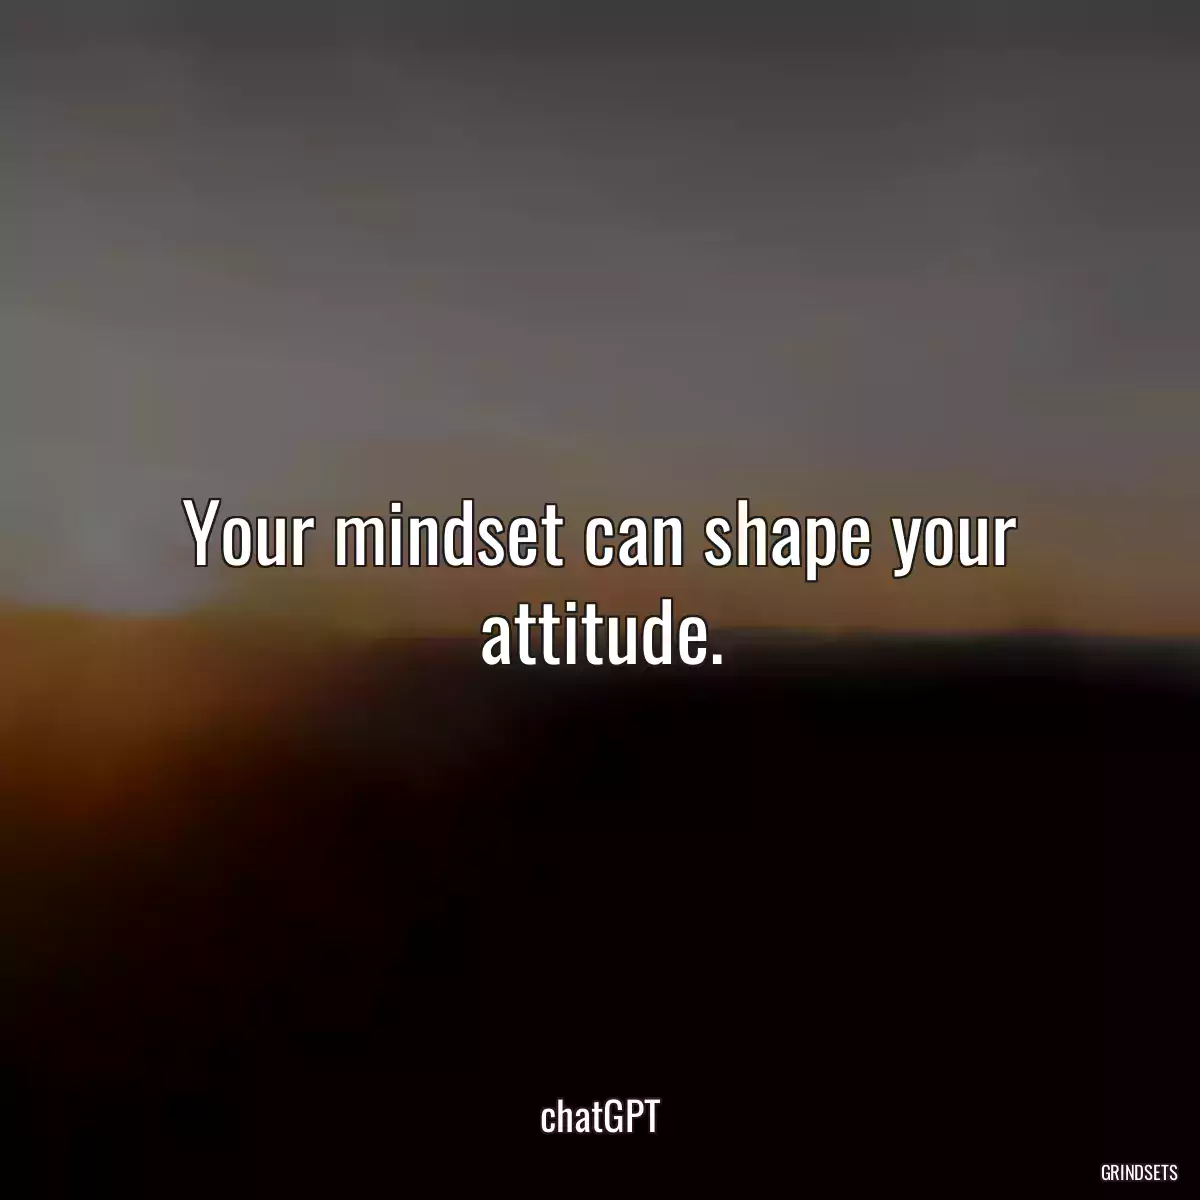 Your mindset can shape your attitude.